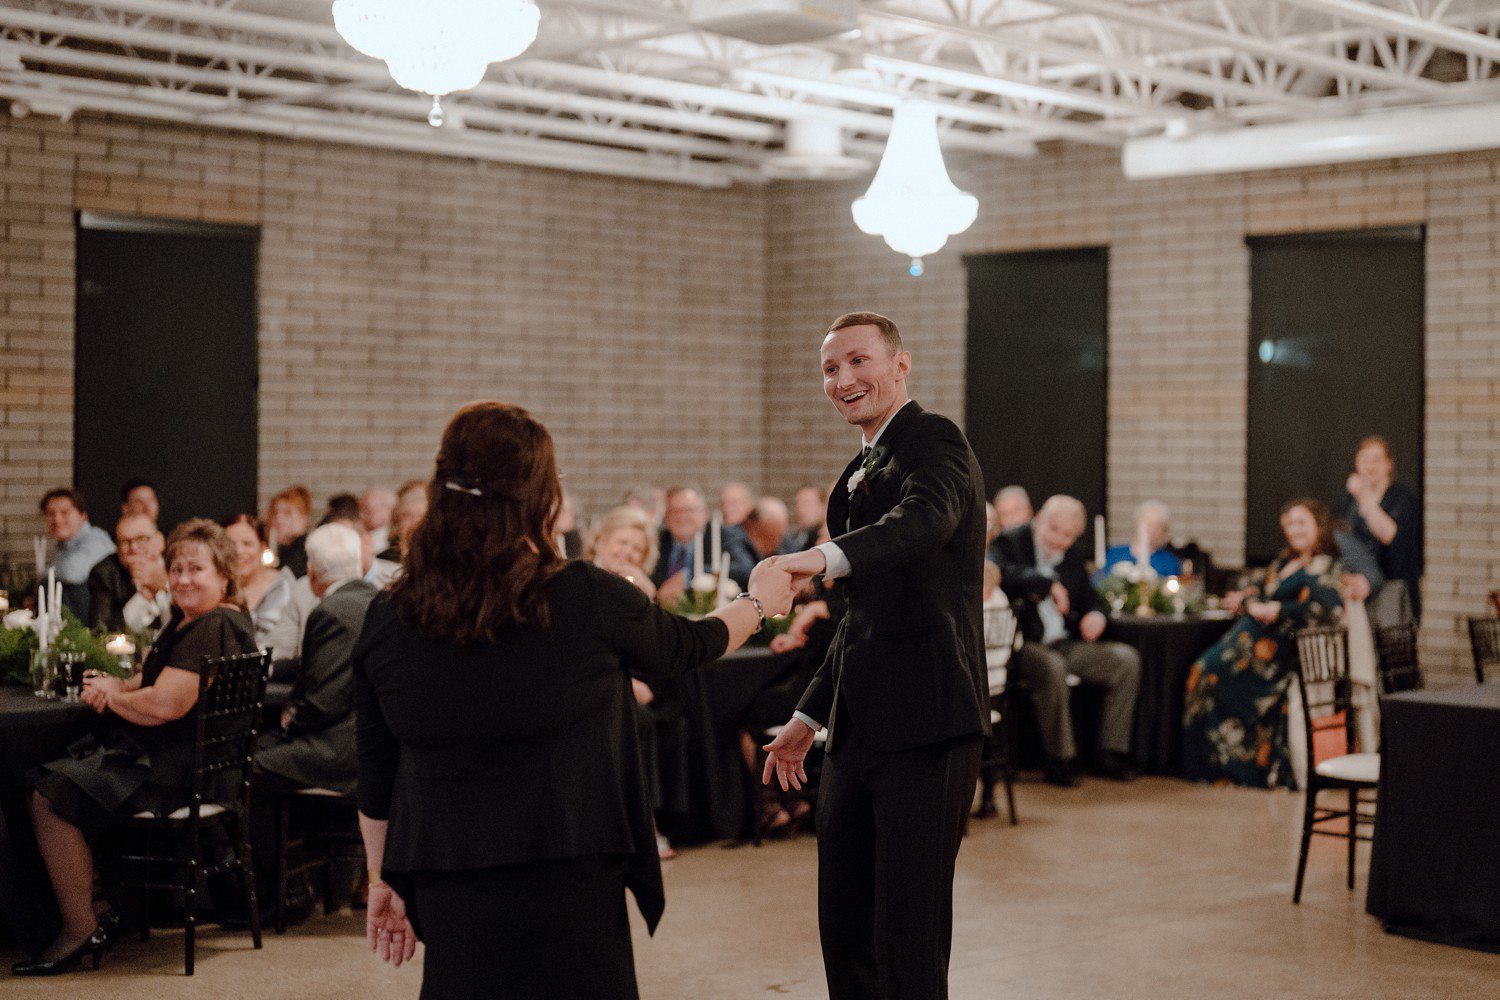 Groom dancing with mom for first dance at wedding reception